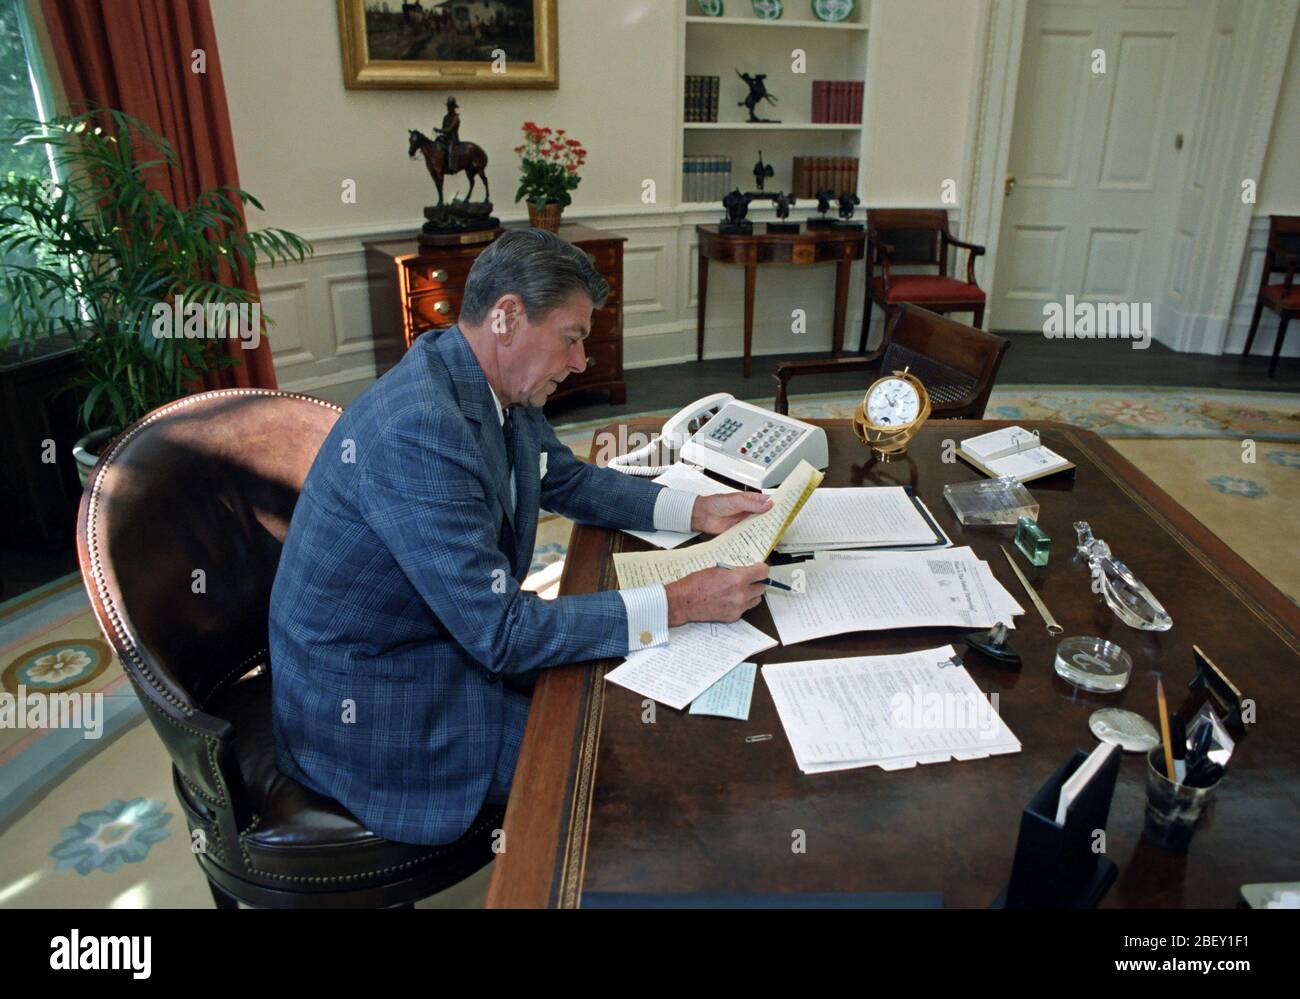 9/24/1981 President Reagan in the Oval Office Working on upcoming speech to the nation Stock Photo